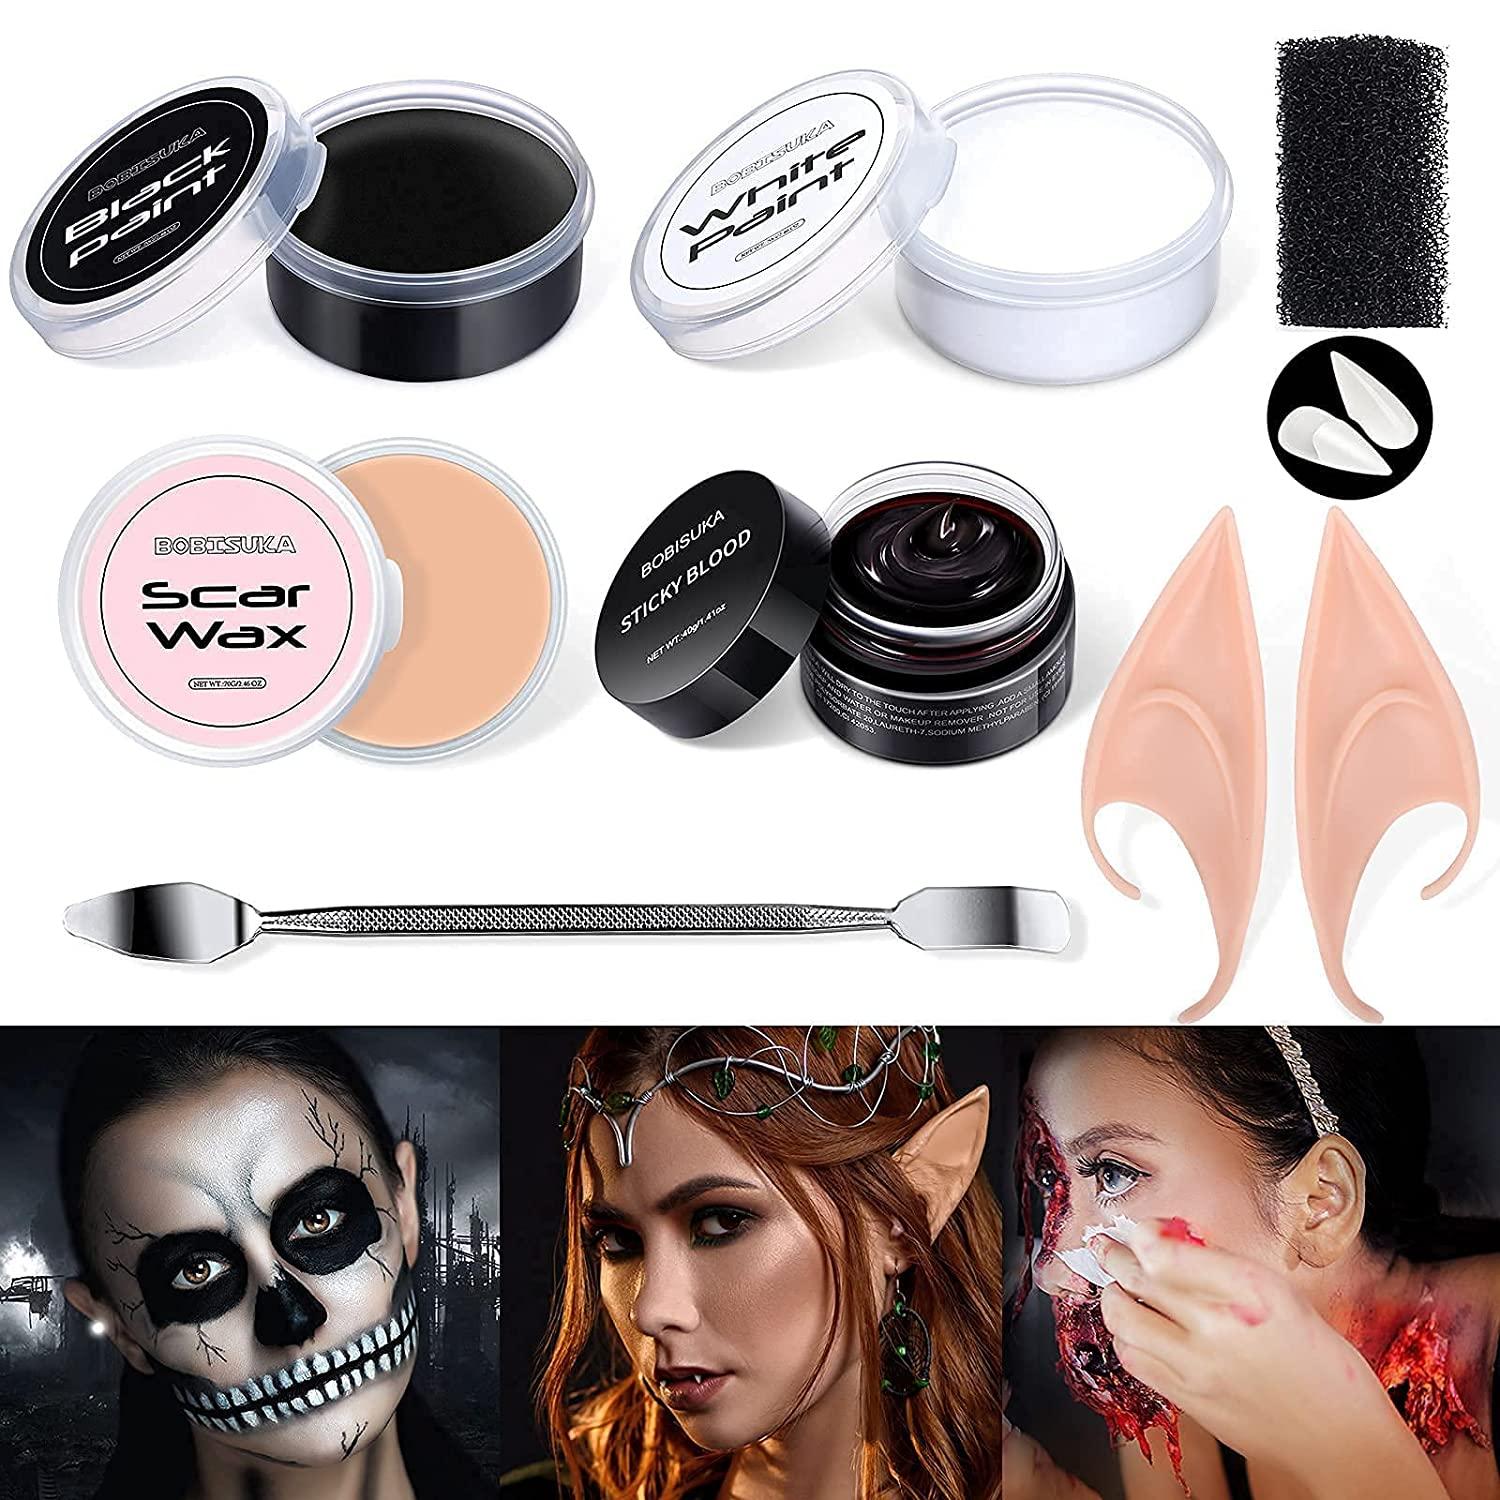 BOBISUKA Demonic Special Effects SFX Halloween Makeup Kit - 5 Colors Bruise  Makeup Face Body Painting Palette + Scar Wax with Spatula Tool + Fake Blood  Splatter Spray + Fake Blood Cream +Stipple Spong